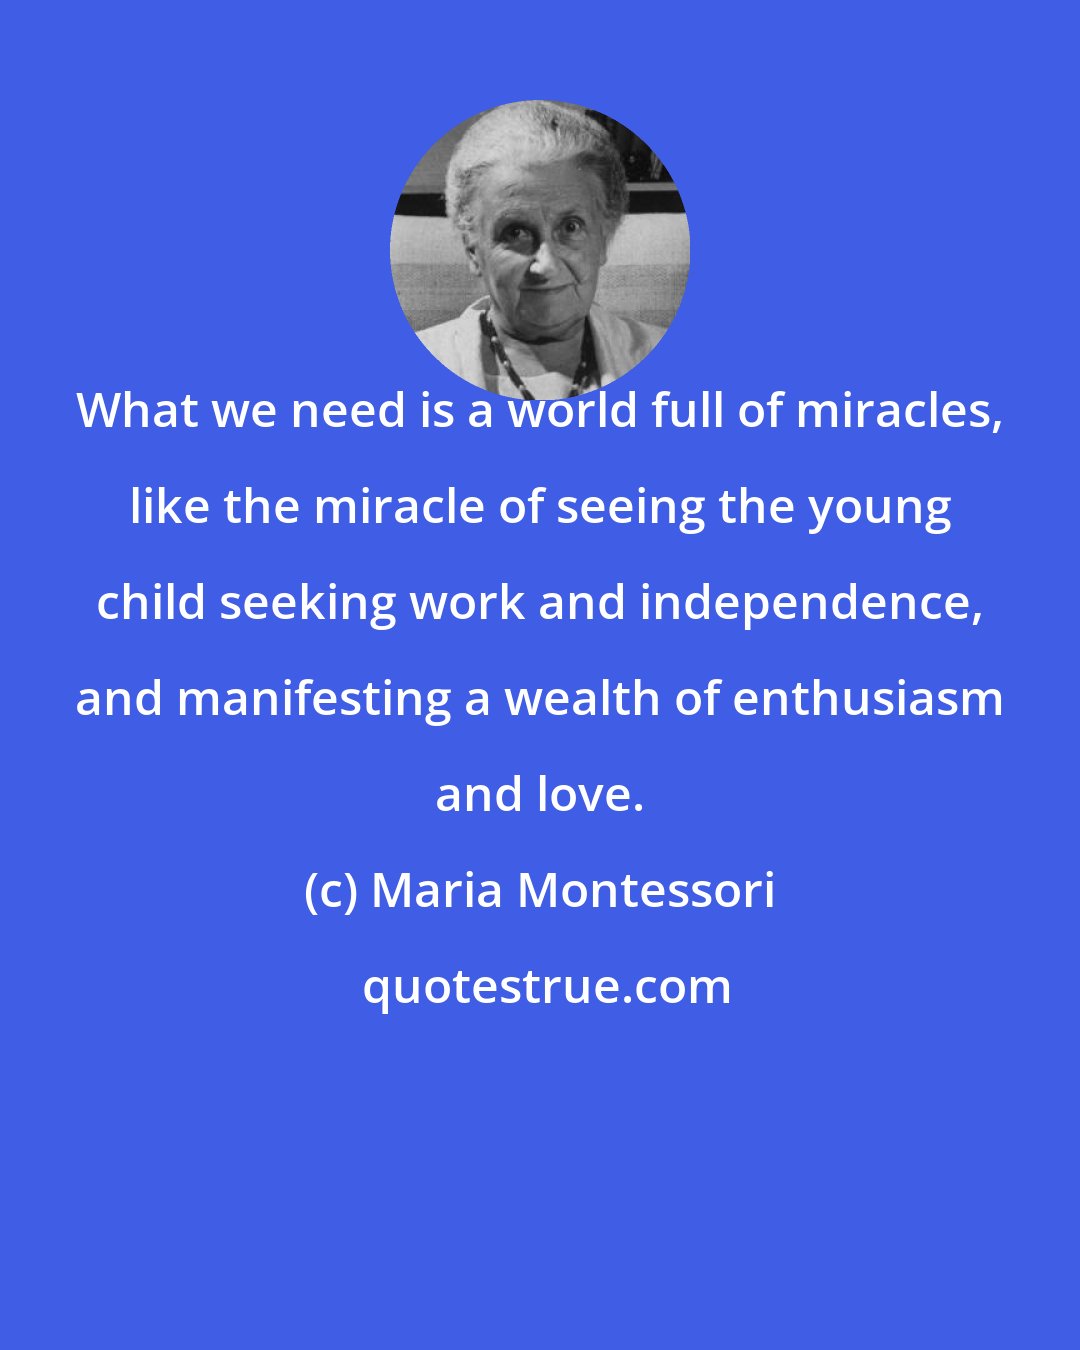 Maria Montessori: What we need is a world full of miracles, like the miracle of seeing the young child seeking work and independence, and manifesting a wealth of enthusiasm and love.